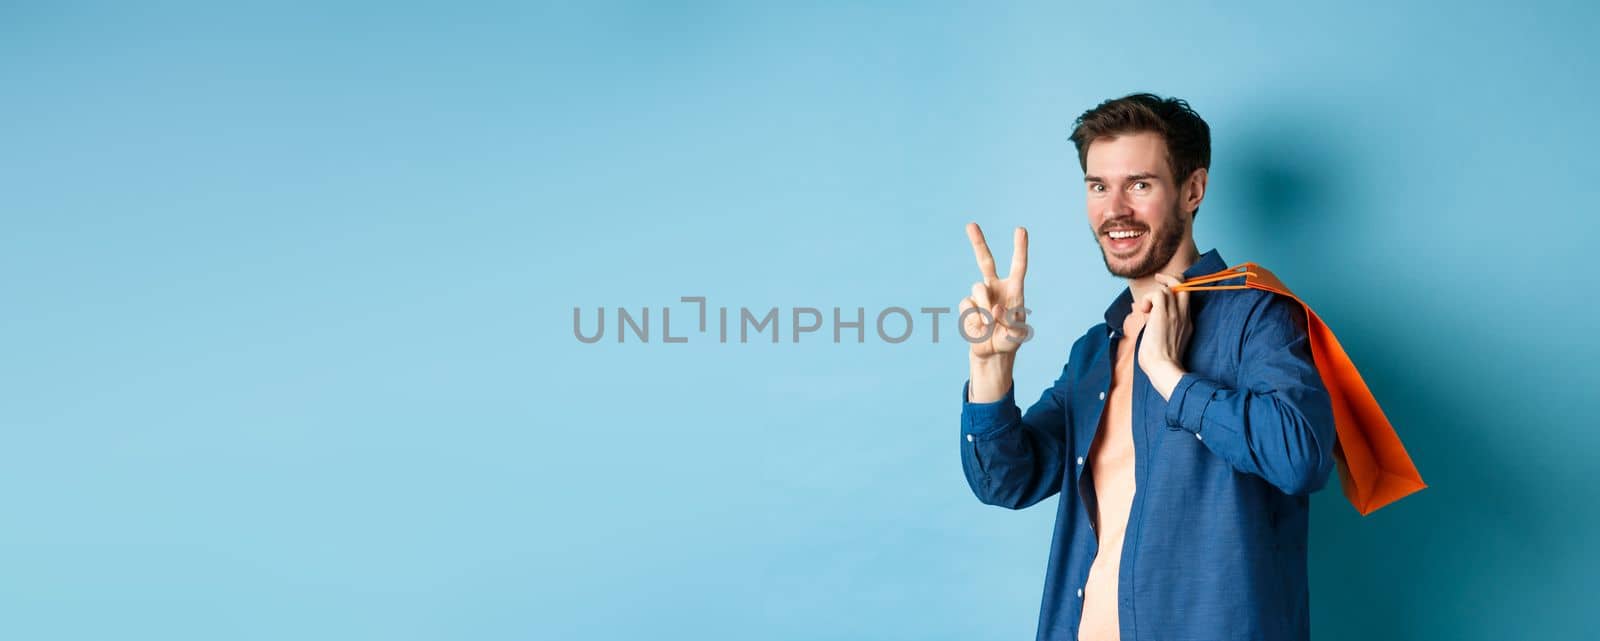 Cheerful guy holding orange shopping bag on shoulder, smiling and showing peace sign, standing on blue background. Copy space